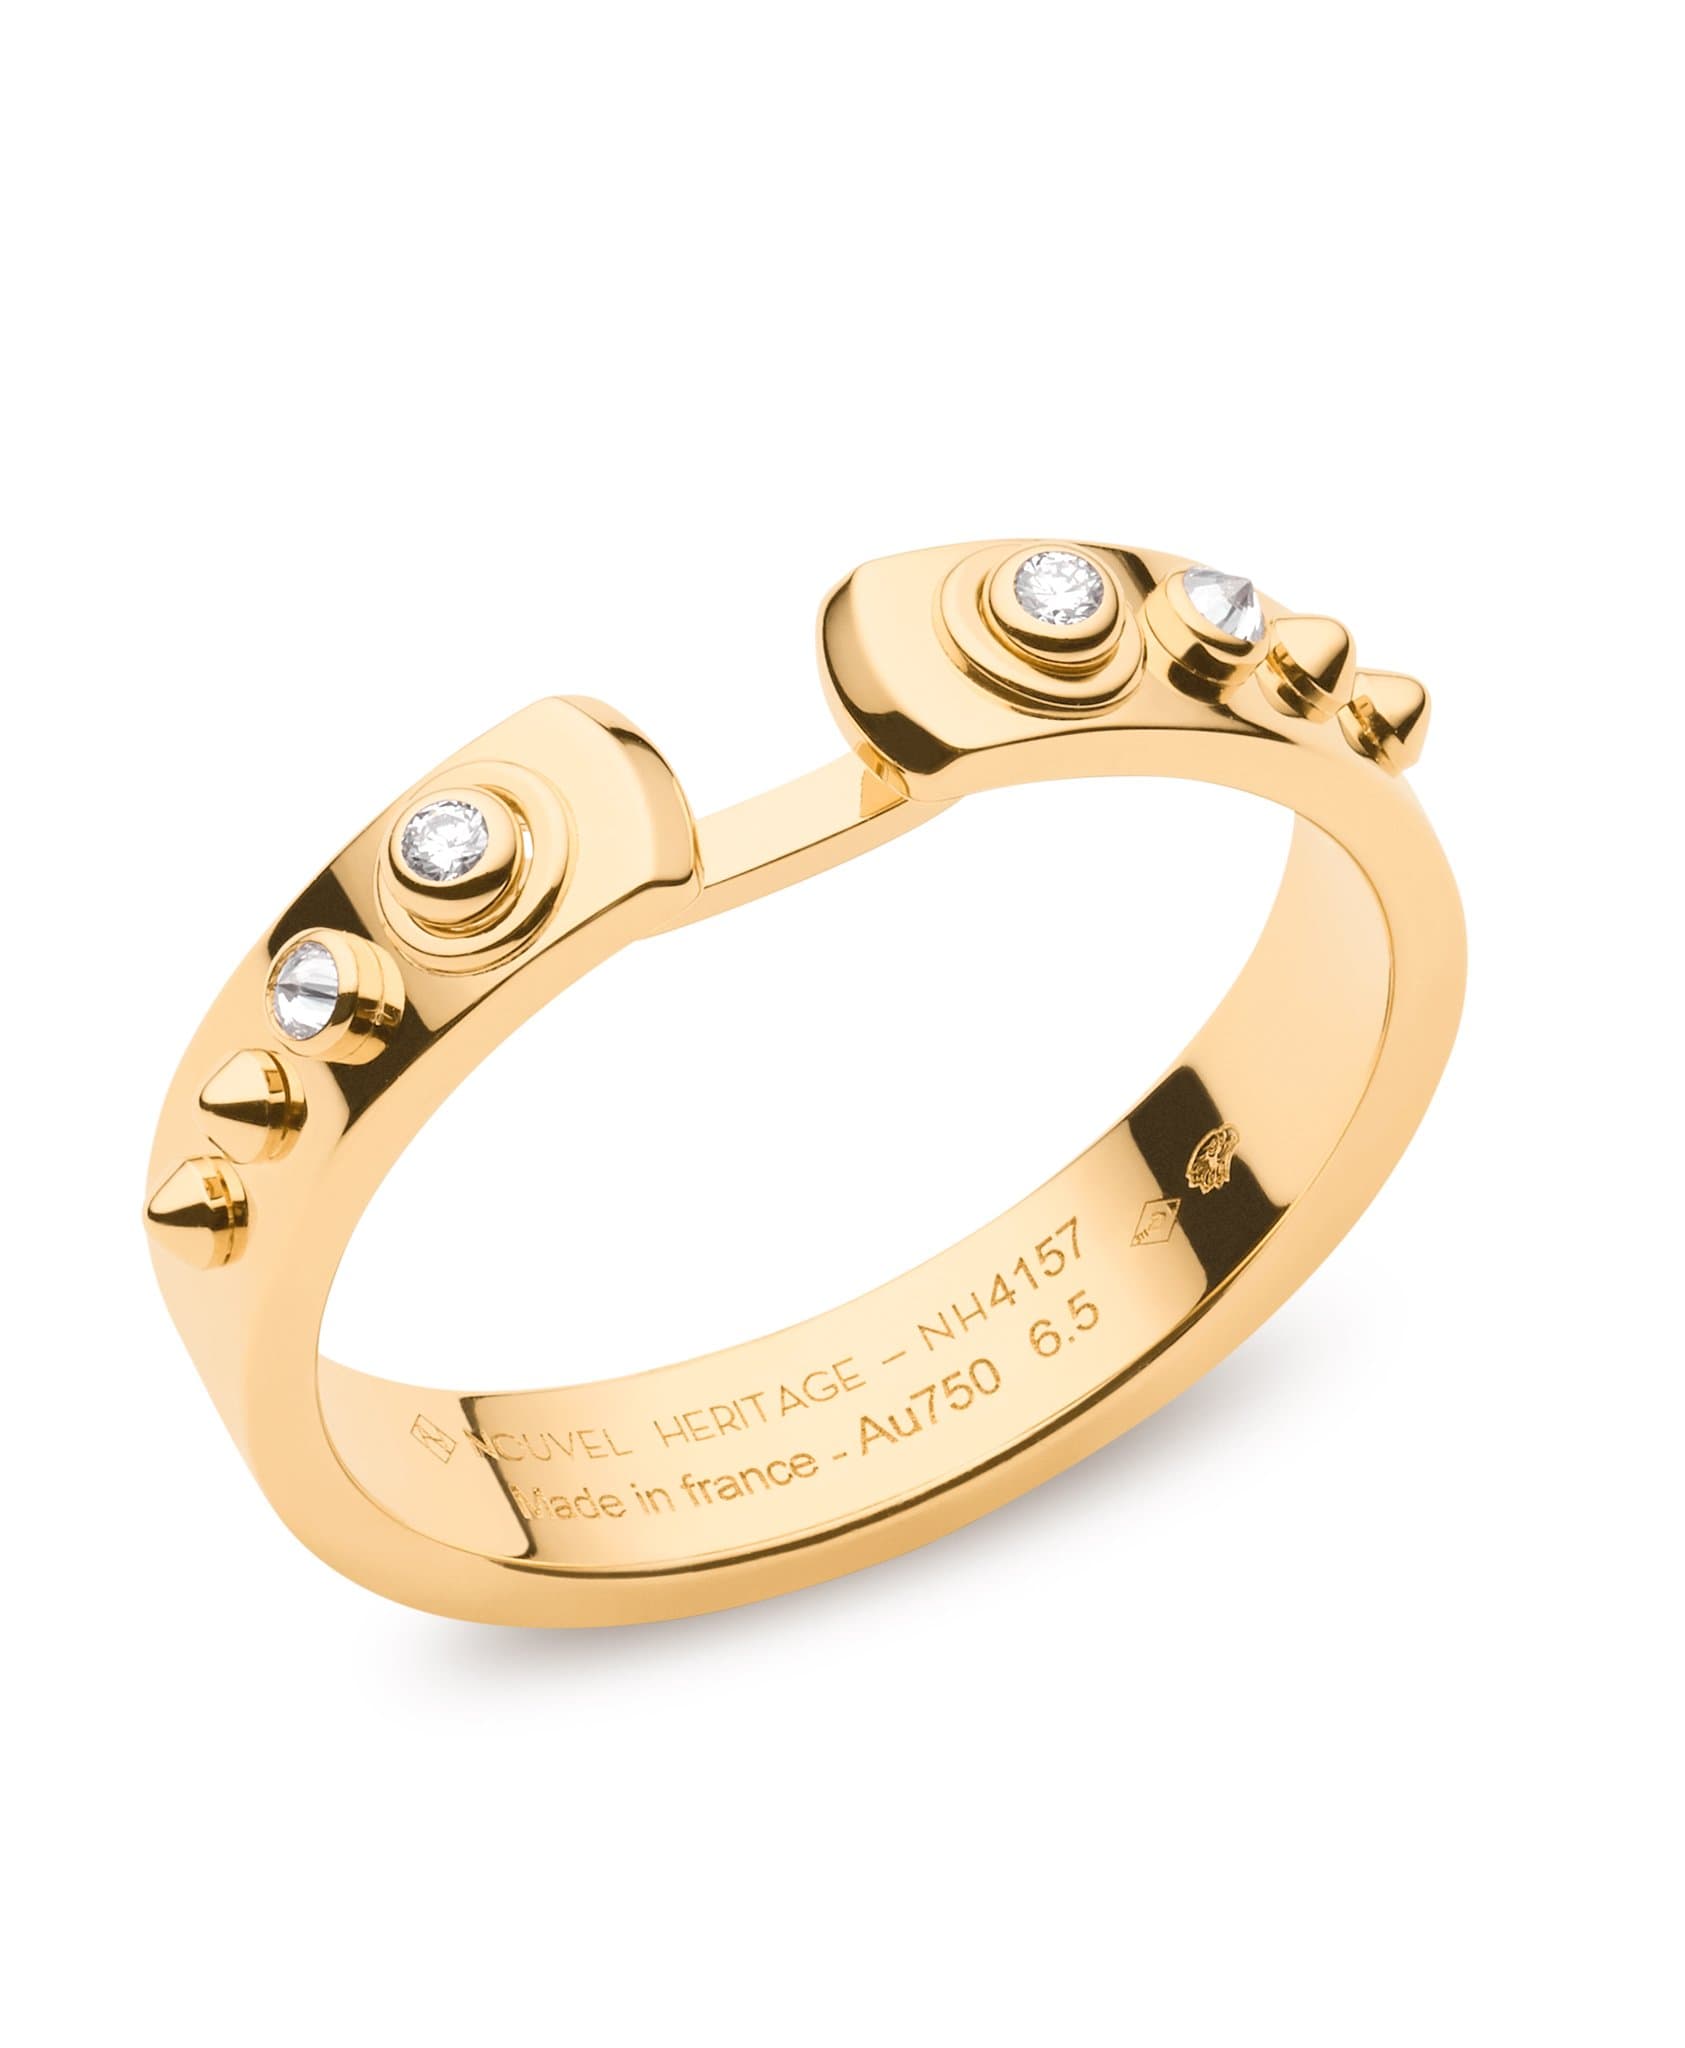 Brunch in NY Mood Ring: Discover Luxury Fine Jewelry | Nouvel Heritage || Yellow Gold